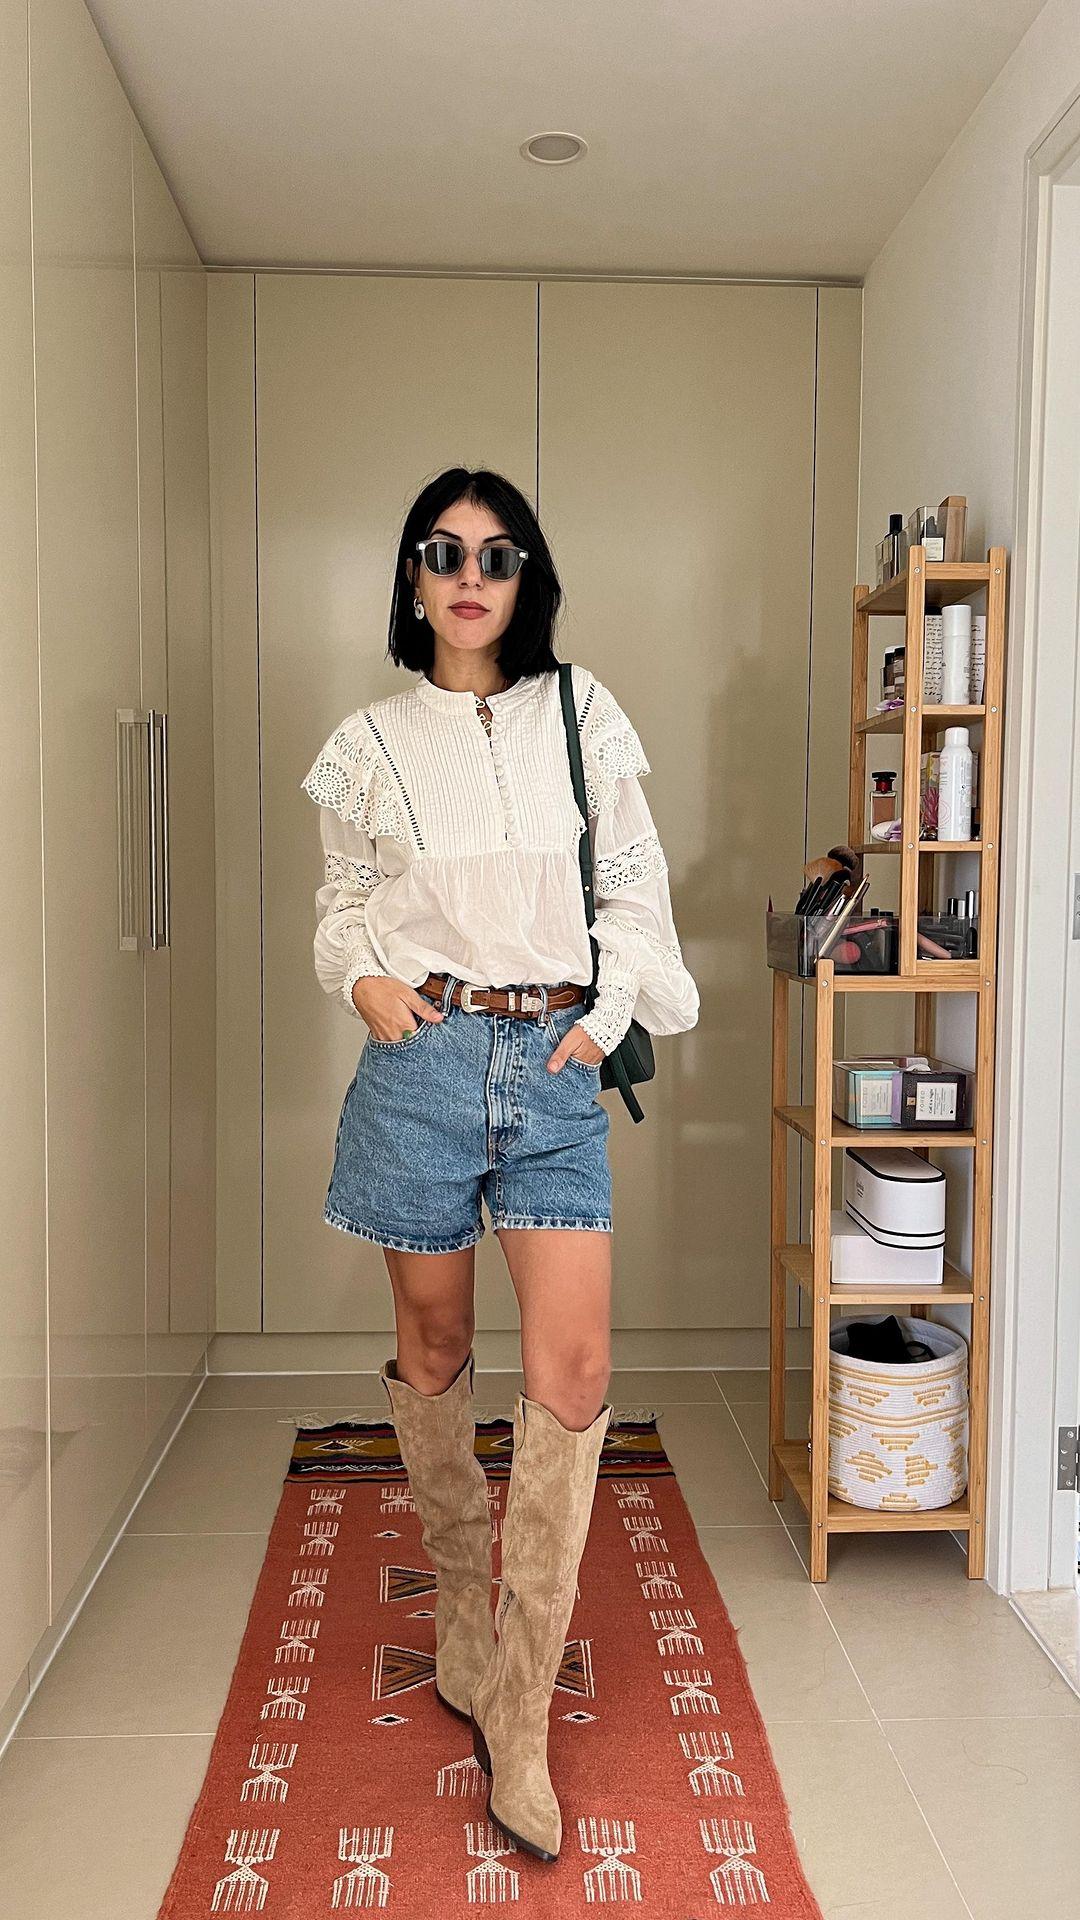 class="content__text"OUTFIT CHALLENGE : 2/30
How to be a cowgirl in 1 lesson 😂

Outfit details : 
Short : @zara 
Blouse : @allsaints 
Boots: @vanessawu_officiel 
Belt : i got it from my mama 
Bag : @polene_paris 
Sunnies : @moscotnyc